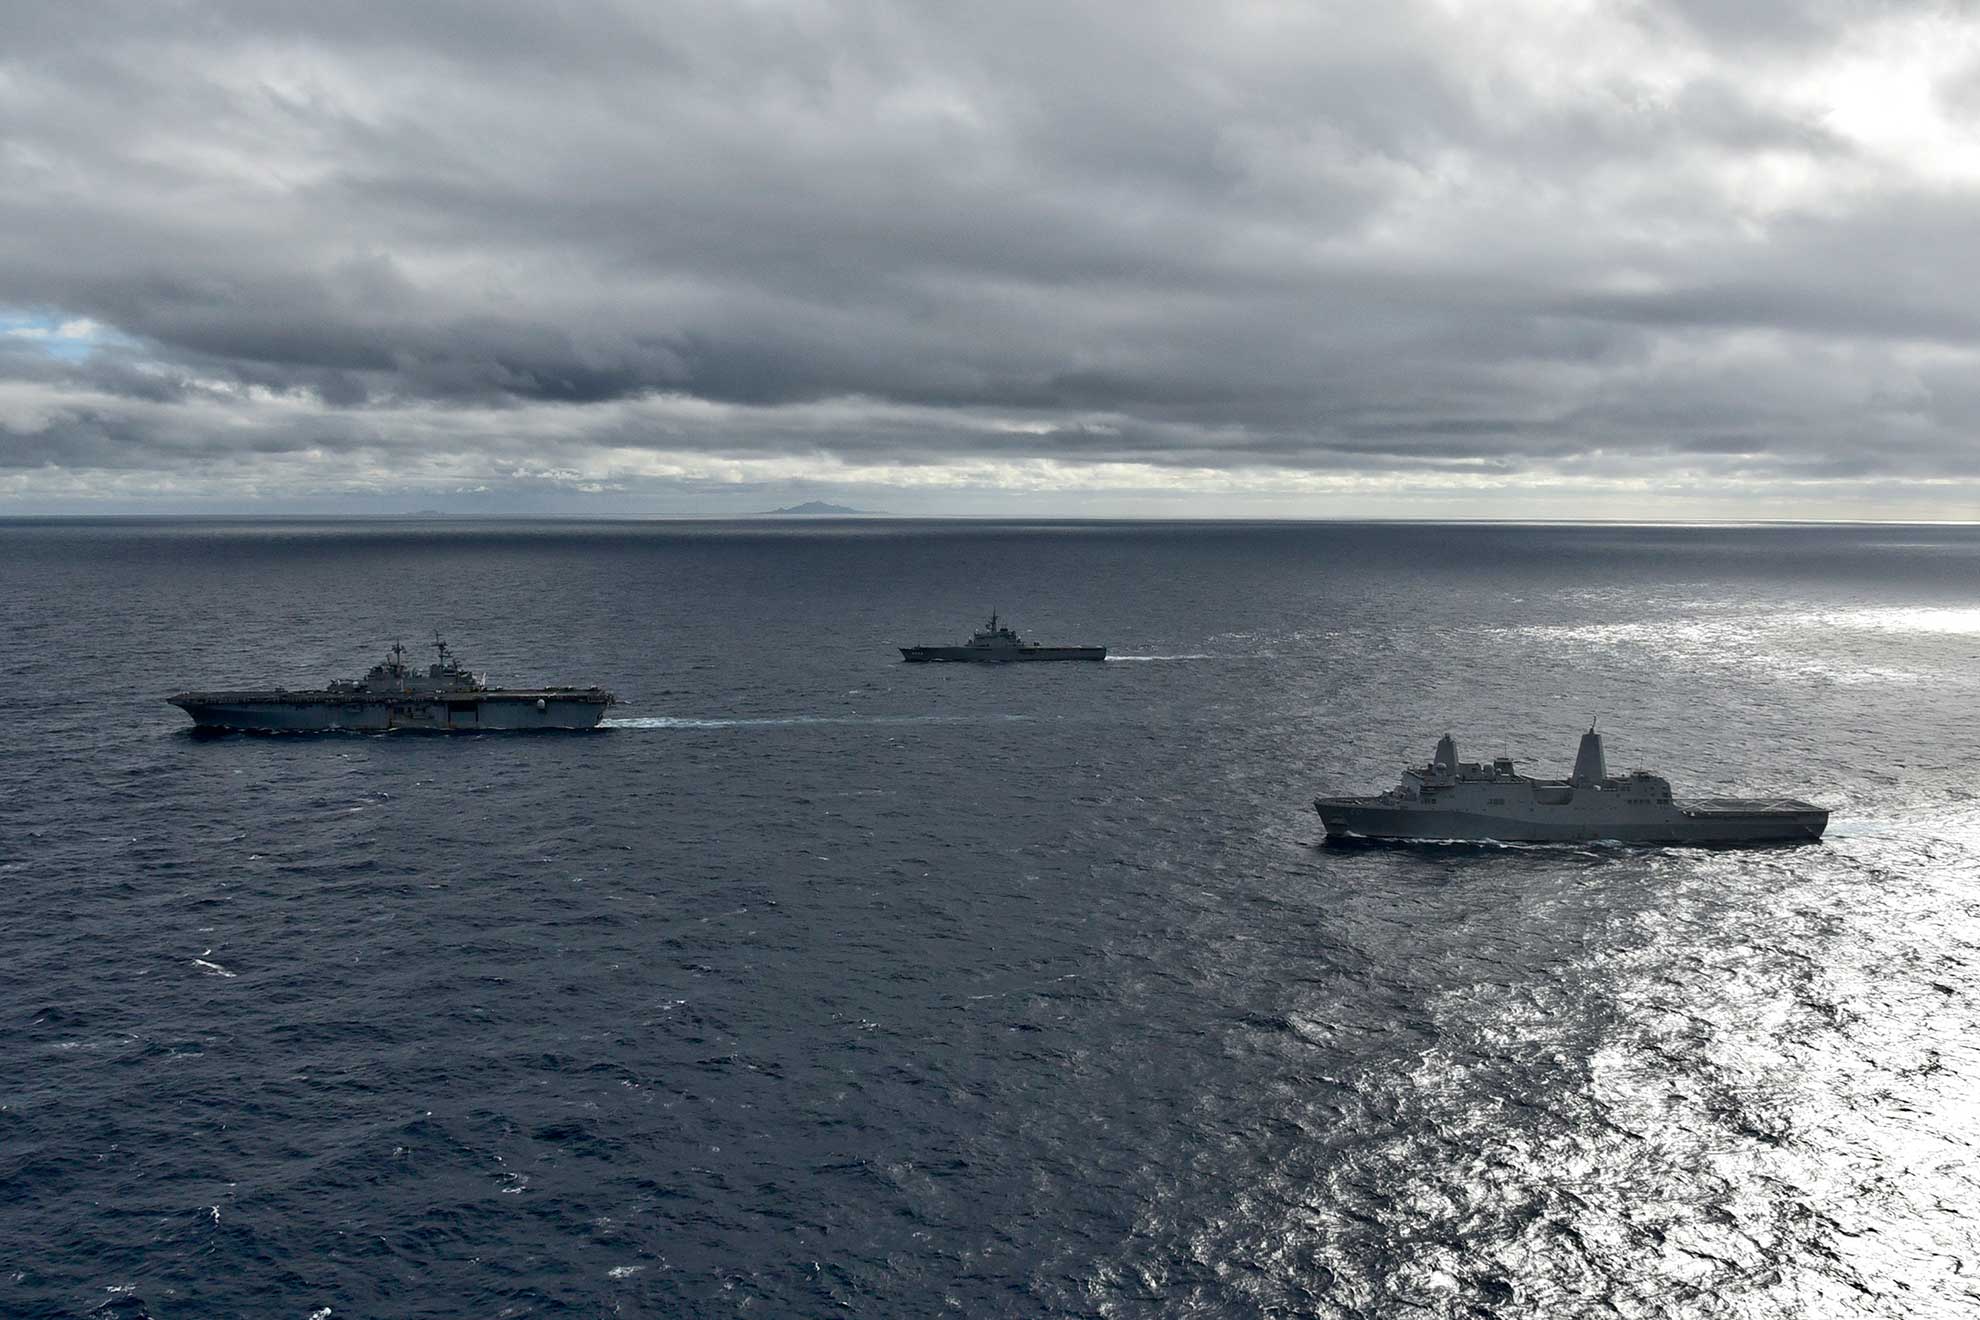 East China sea (Jan. 12, 2019) The amphibious assault ship USS Wasp (LHD 1), left, the Japan Maritime Self-Defense Force amphibious transport dock ship JS Kunisaki (LST 4003), and the amphibious transport dock ship USS Green Bay (LPD 20), right, transit in formation during a cooperative deployment. Wasp, flagship of Wasp Amphibious Ready Group, is operating in the Indo-Pacific region to enhance interoperability with partners and serve as a ready-response force for any type of contingency -- U.S. Navy photo by MCS1 Class Daniel Barker. -